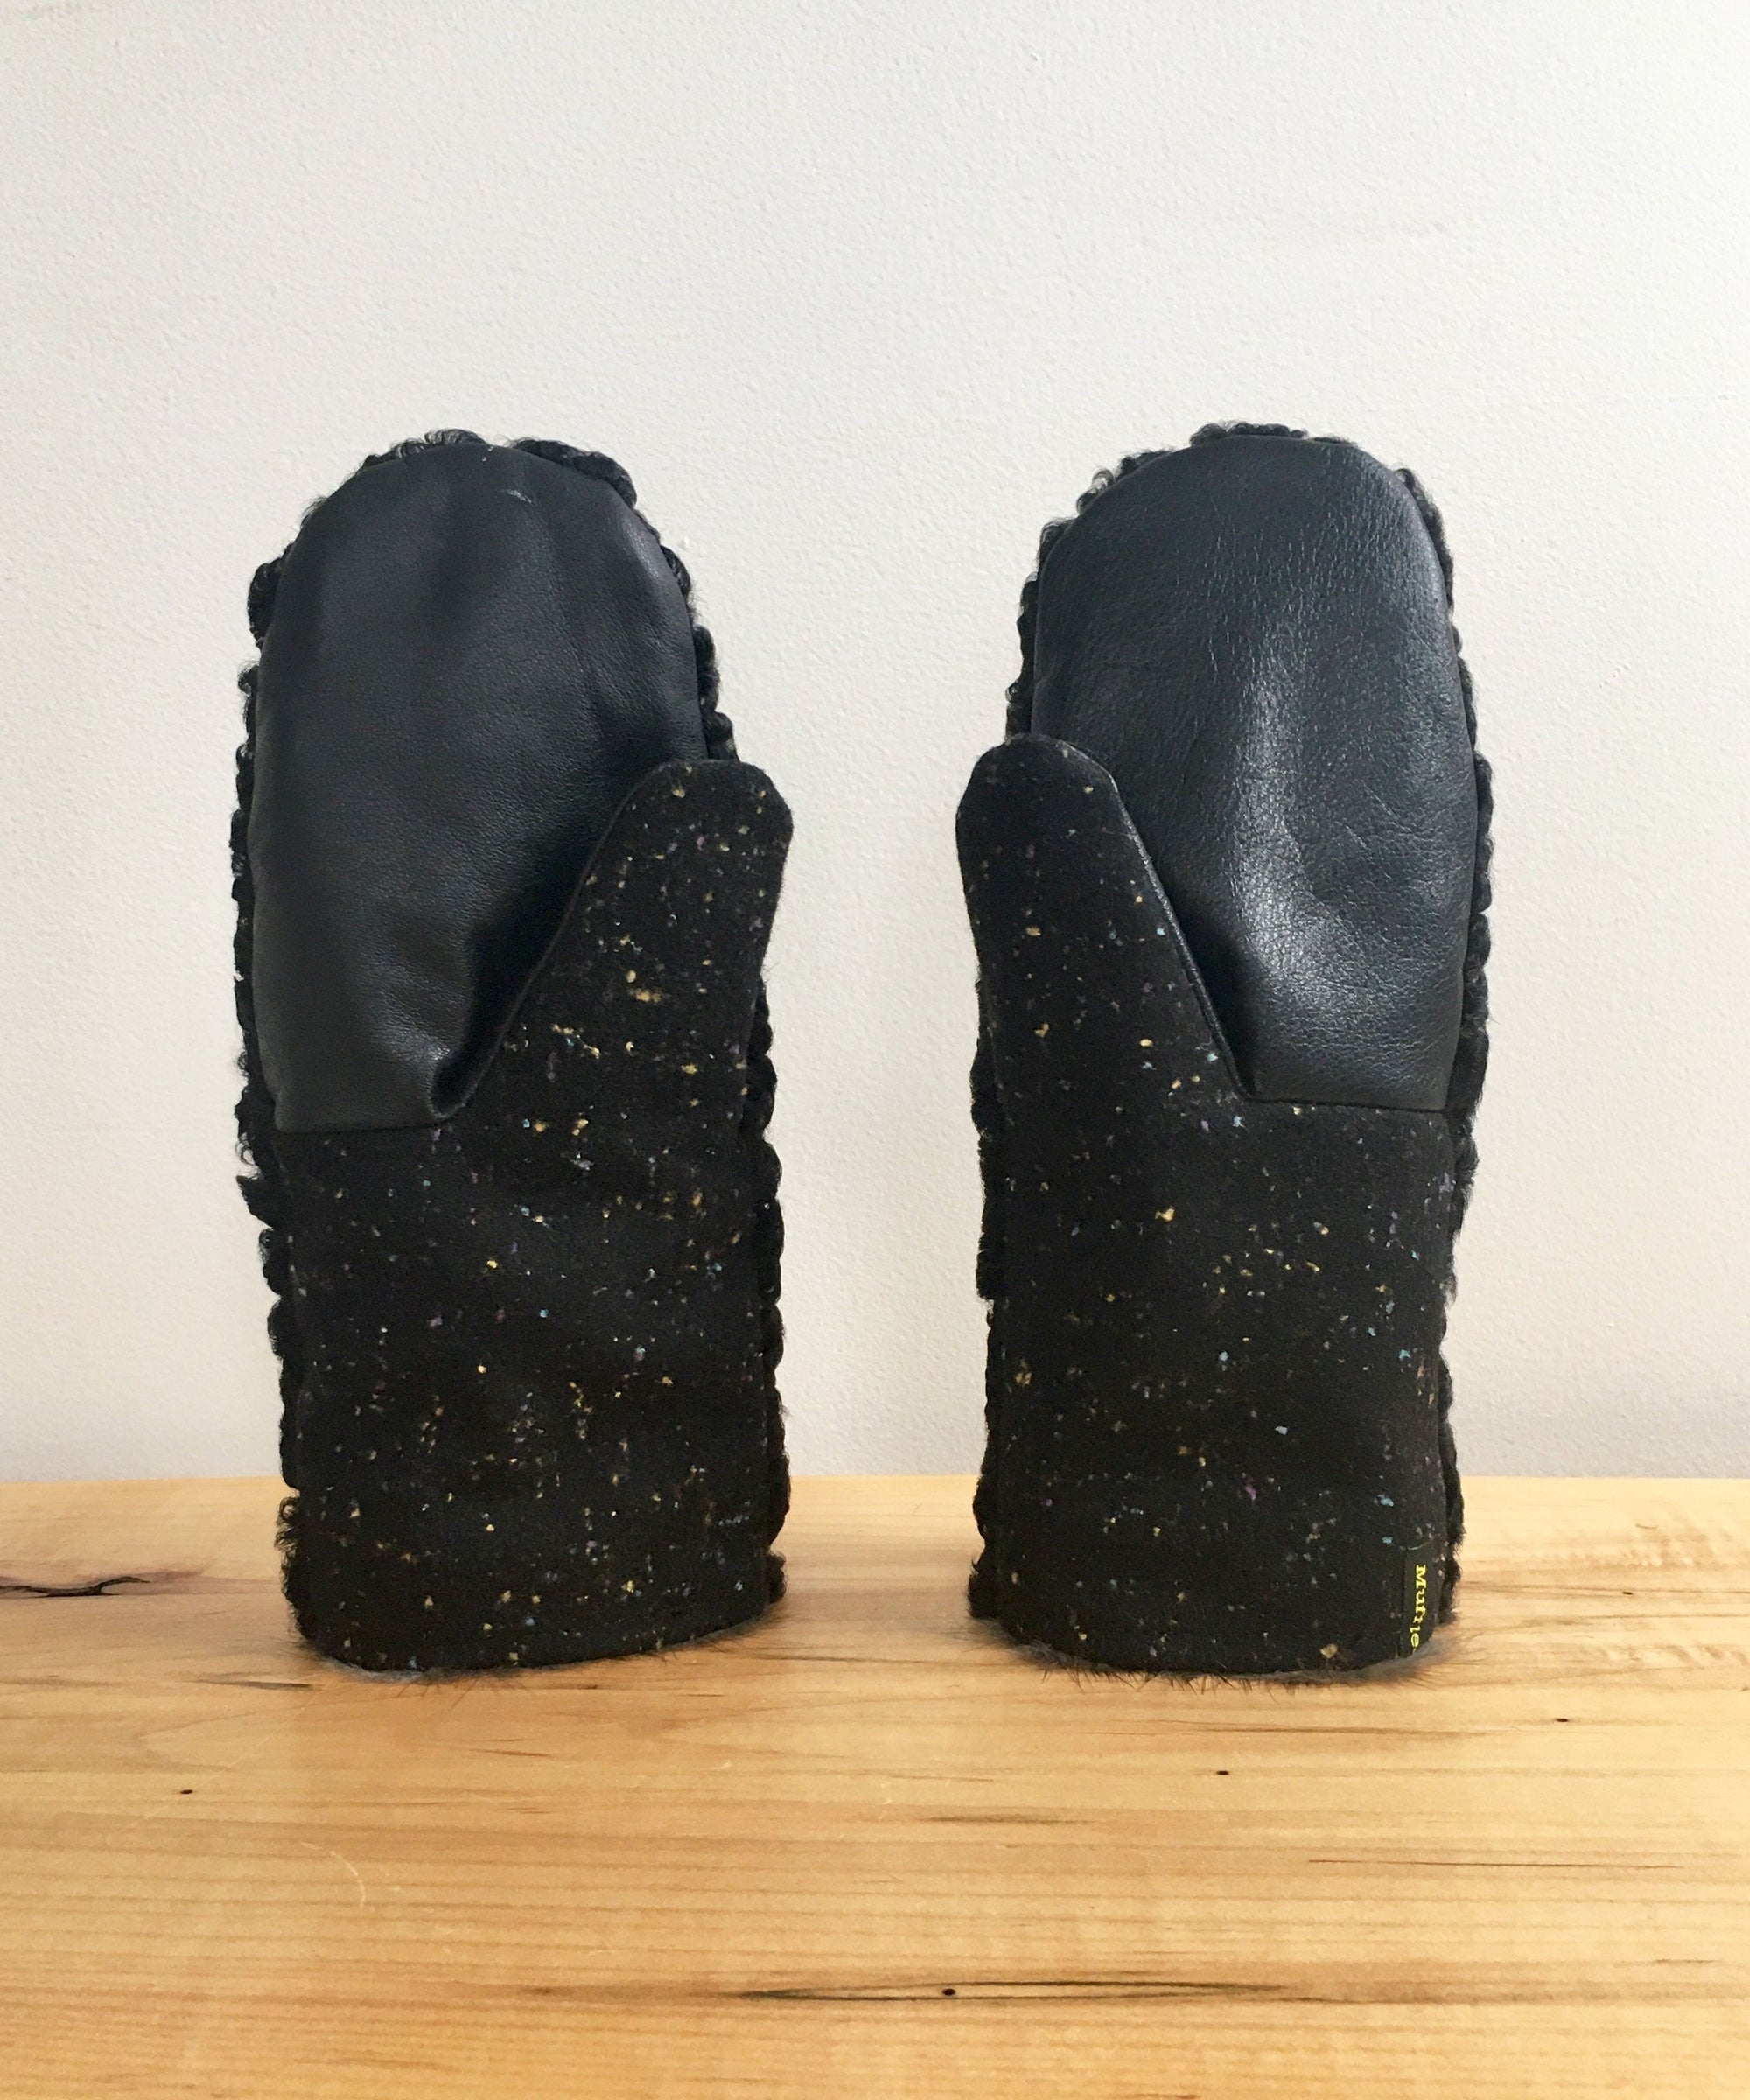 Sustainable Real Fur Winter Mittens with Fur Lining made in Canada, Black Astrakan Mittens, Sheepskin Mittens Real Fur Gloves